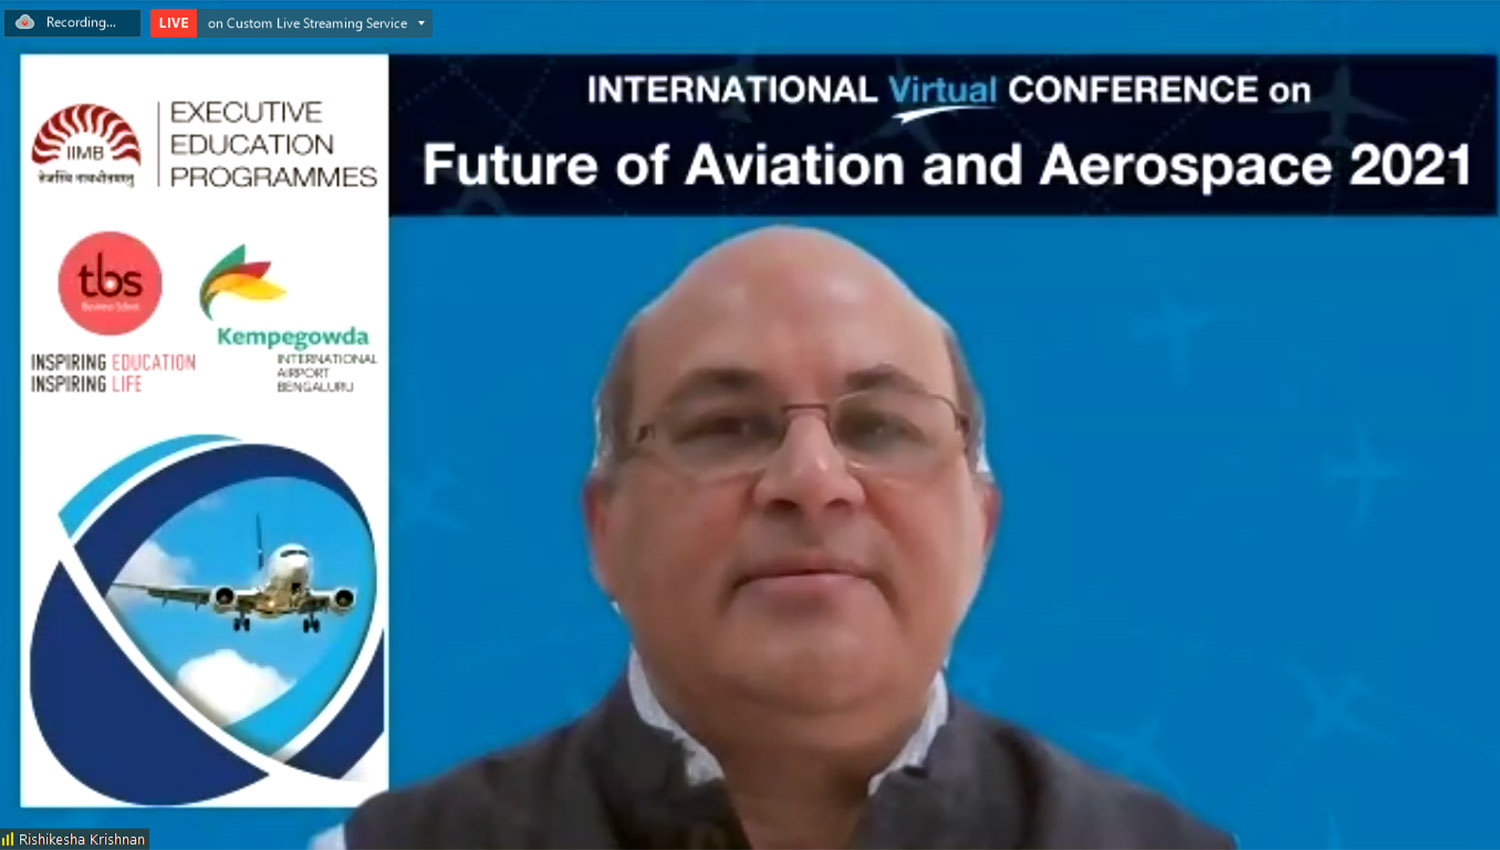 Prof. Rishikesha T Krishnan, Director, IIMB, delivers the inaugural address at the International Virtual Conference on Future of Aviation and Aerospace 2021 on February 17.